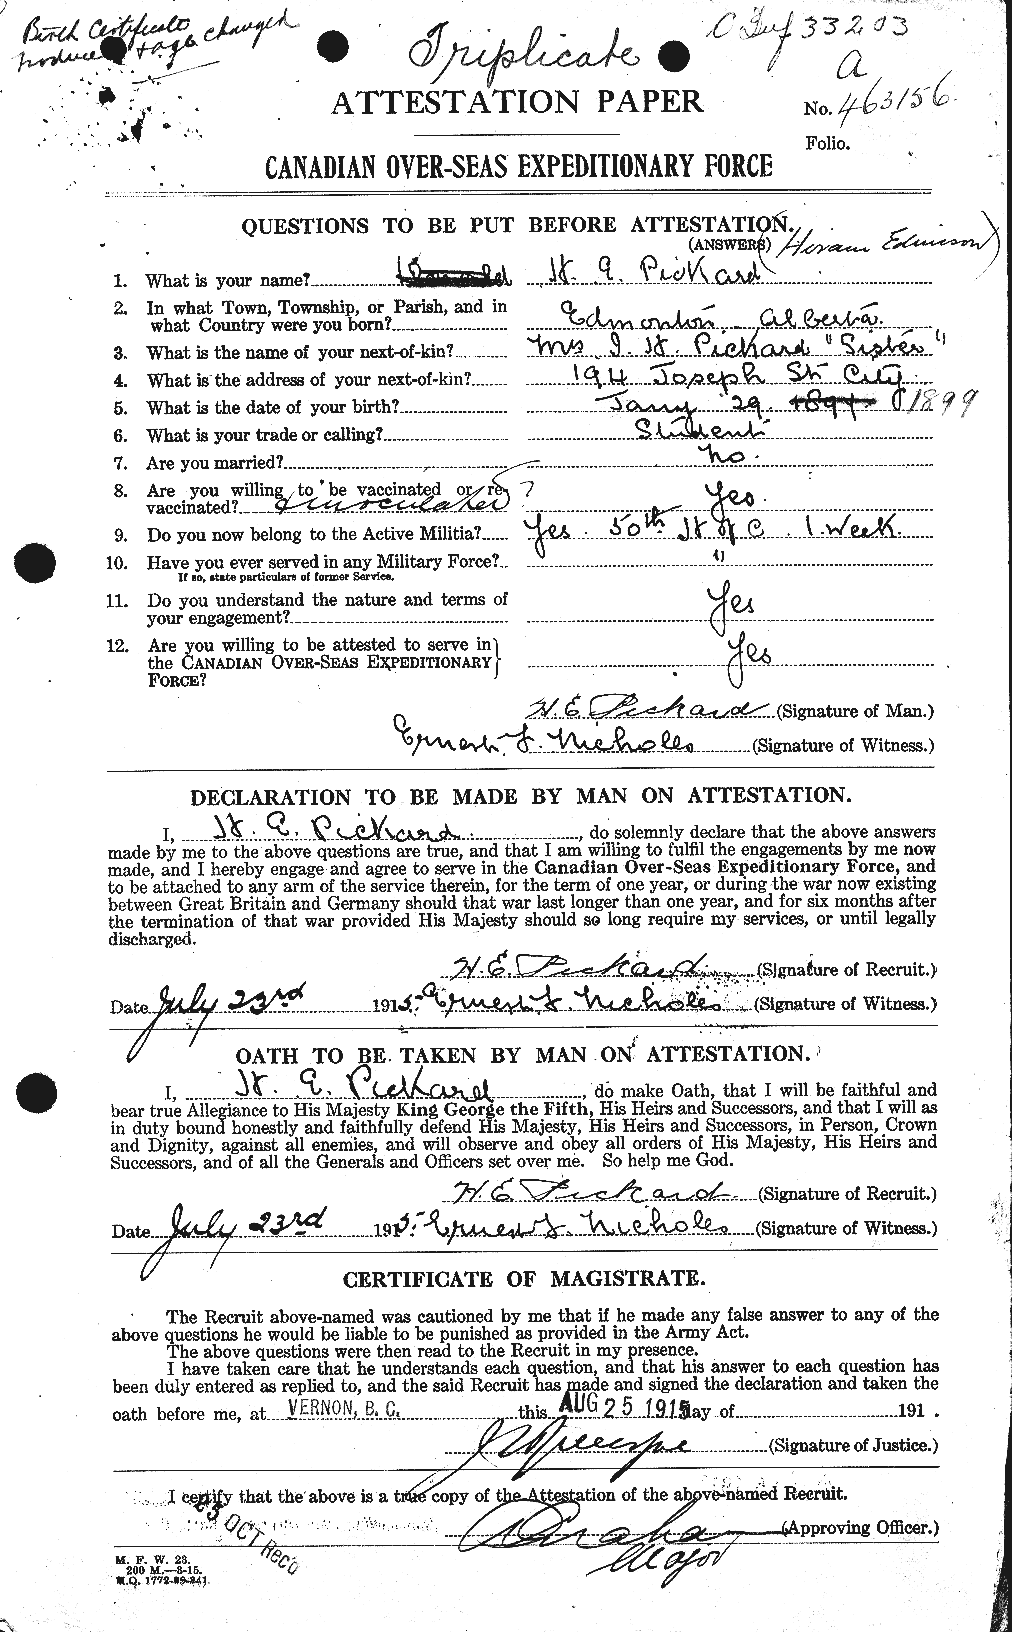 Personnel Records of the First World War - CEF 579438a